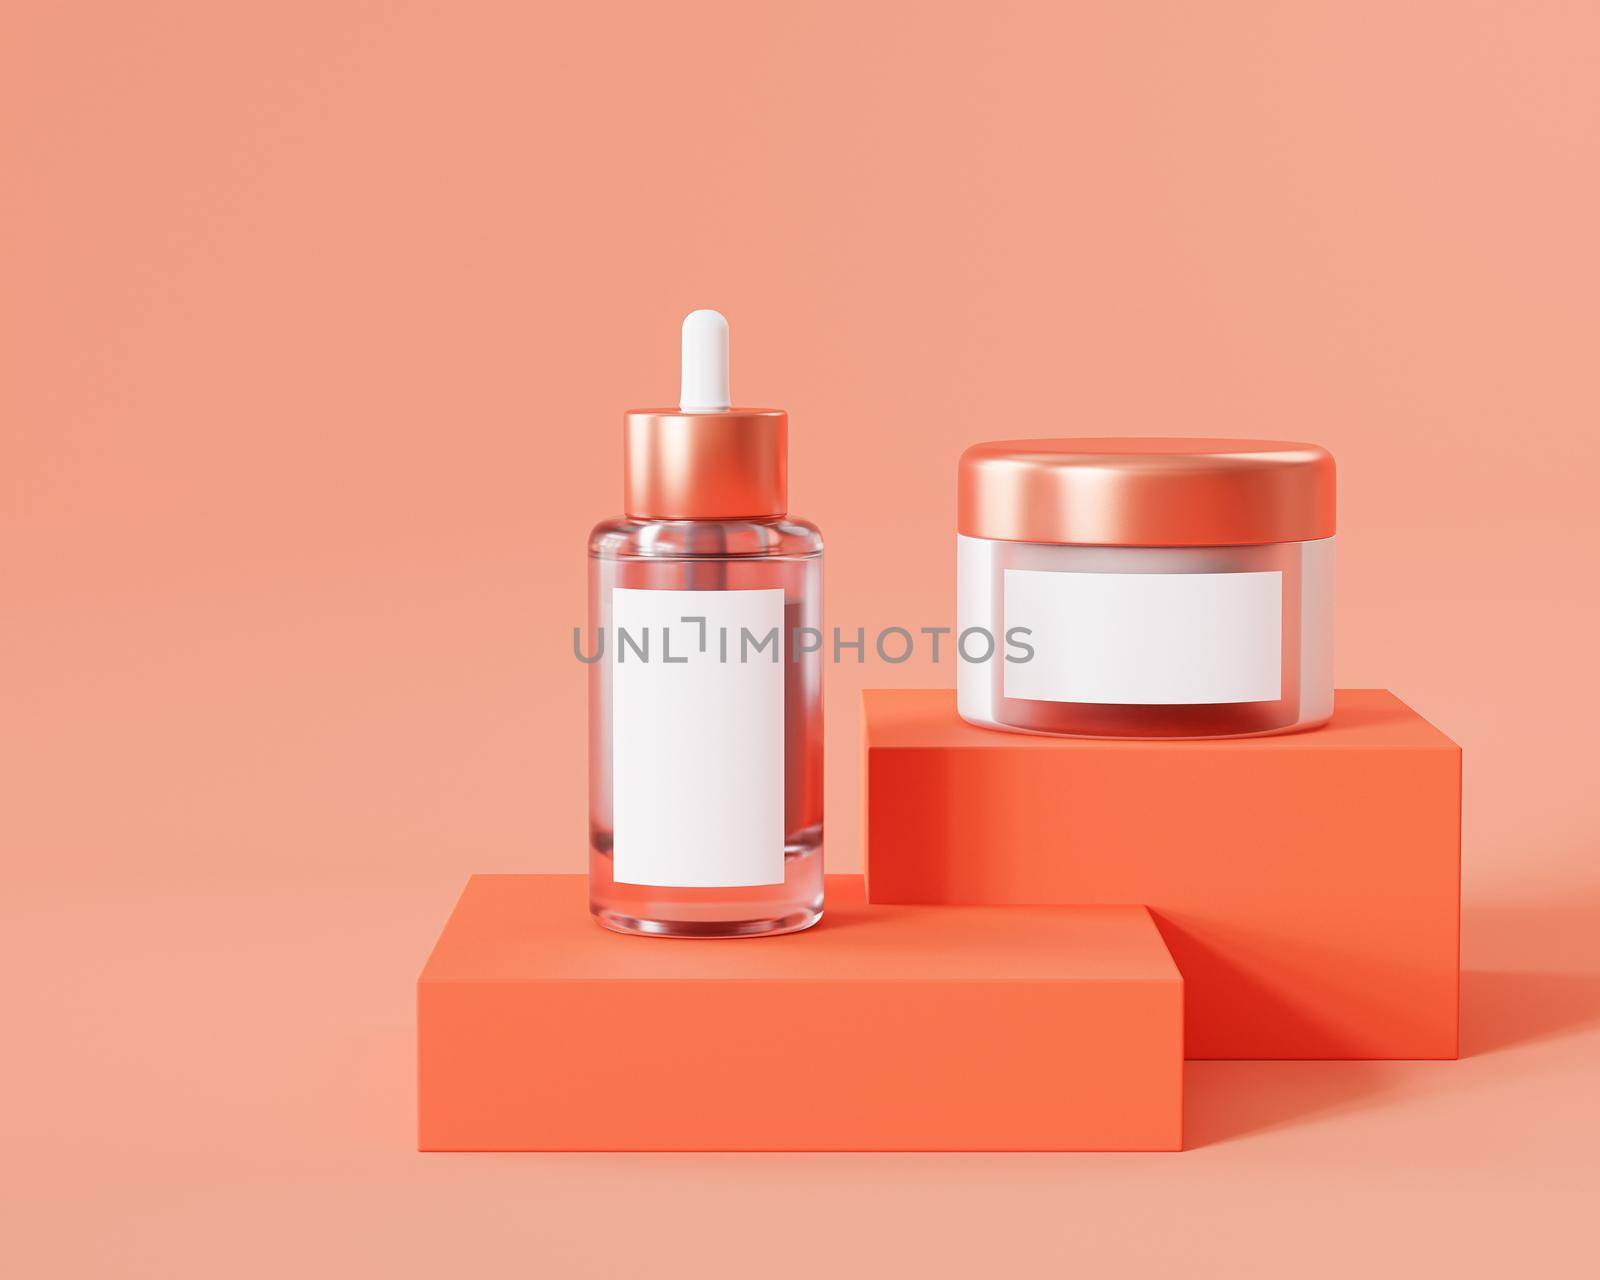 Mockup bottle and jar for cosmetics products, template or advertising, orange background, 3d illustration render by Frostroomhead